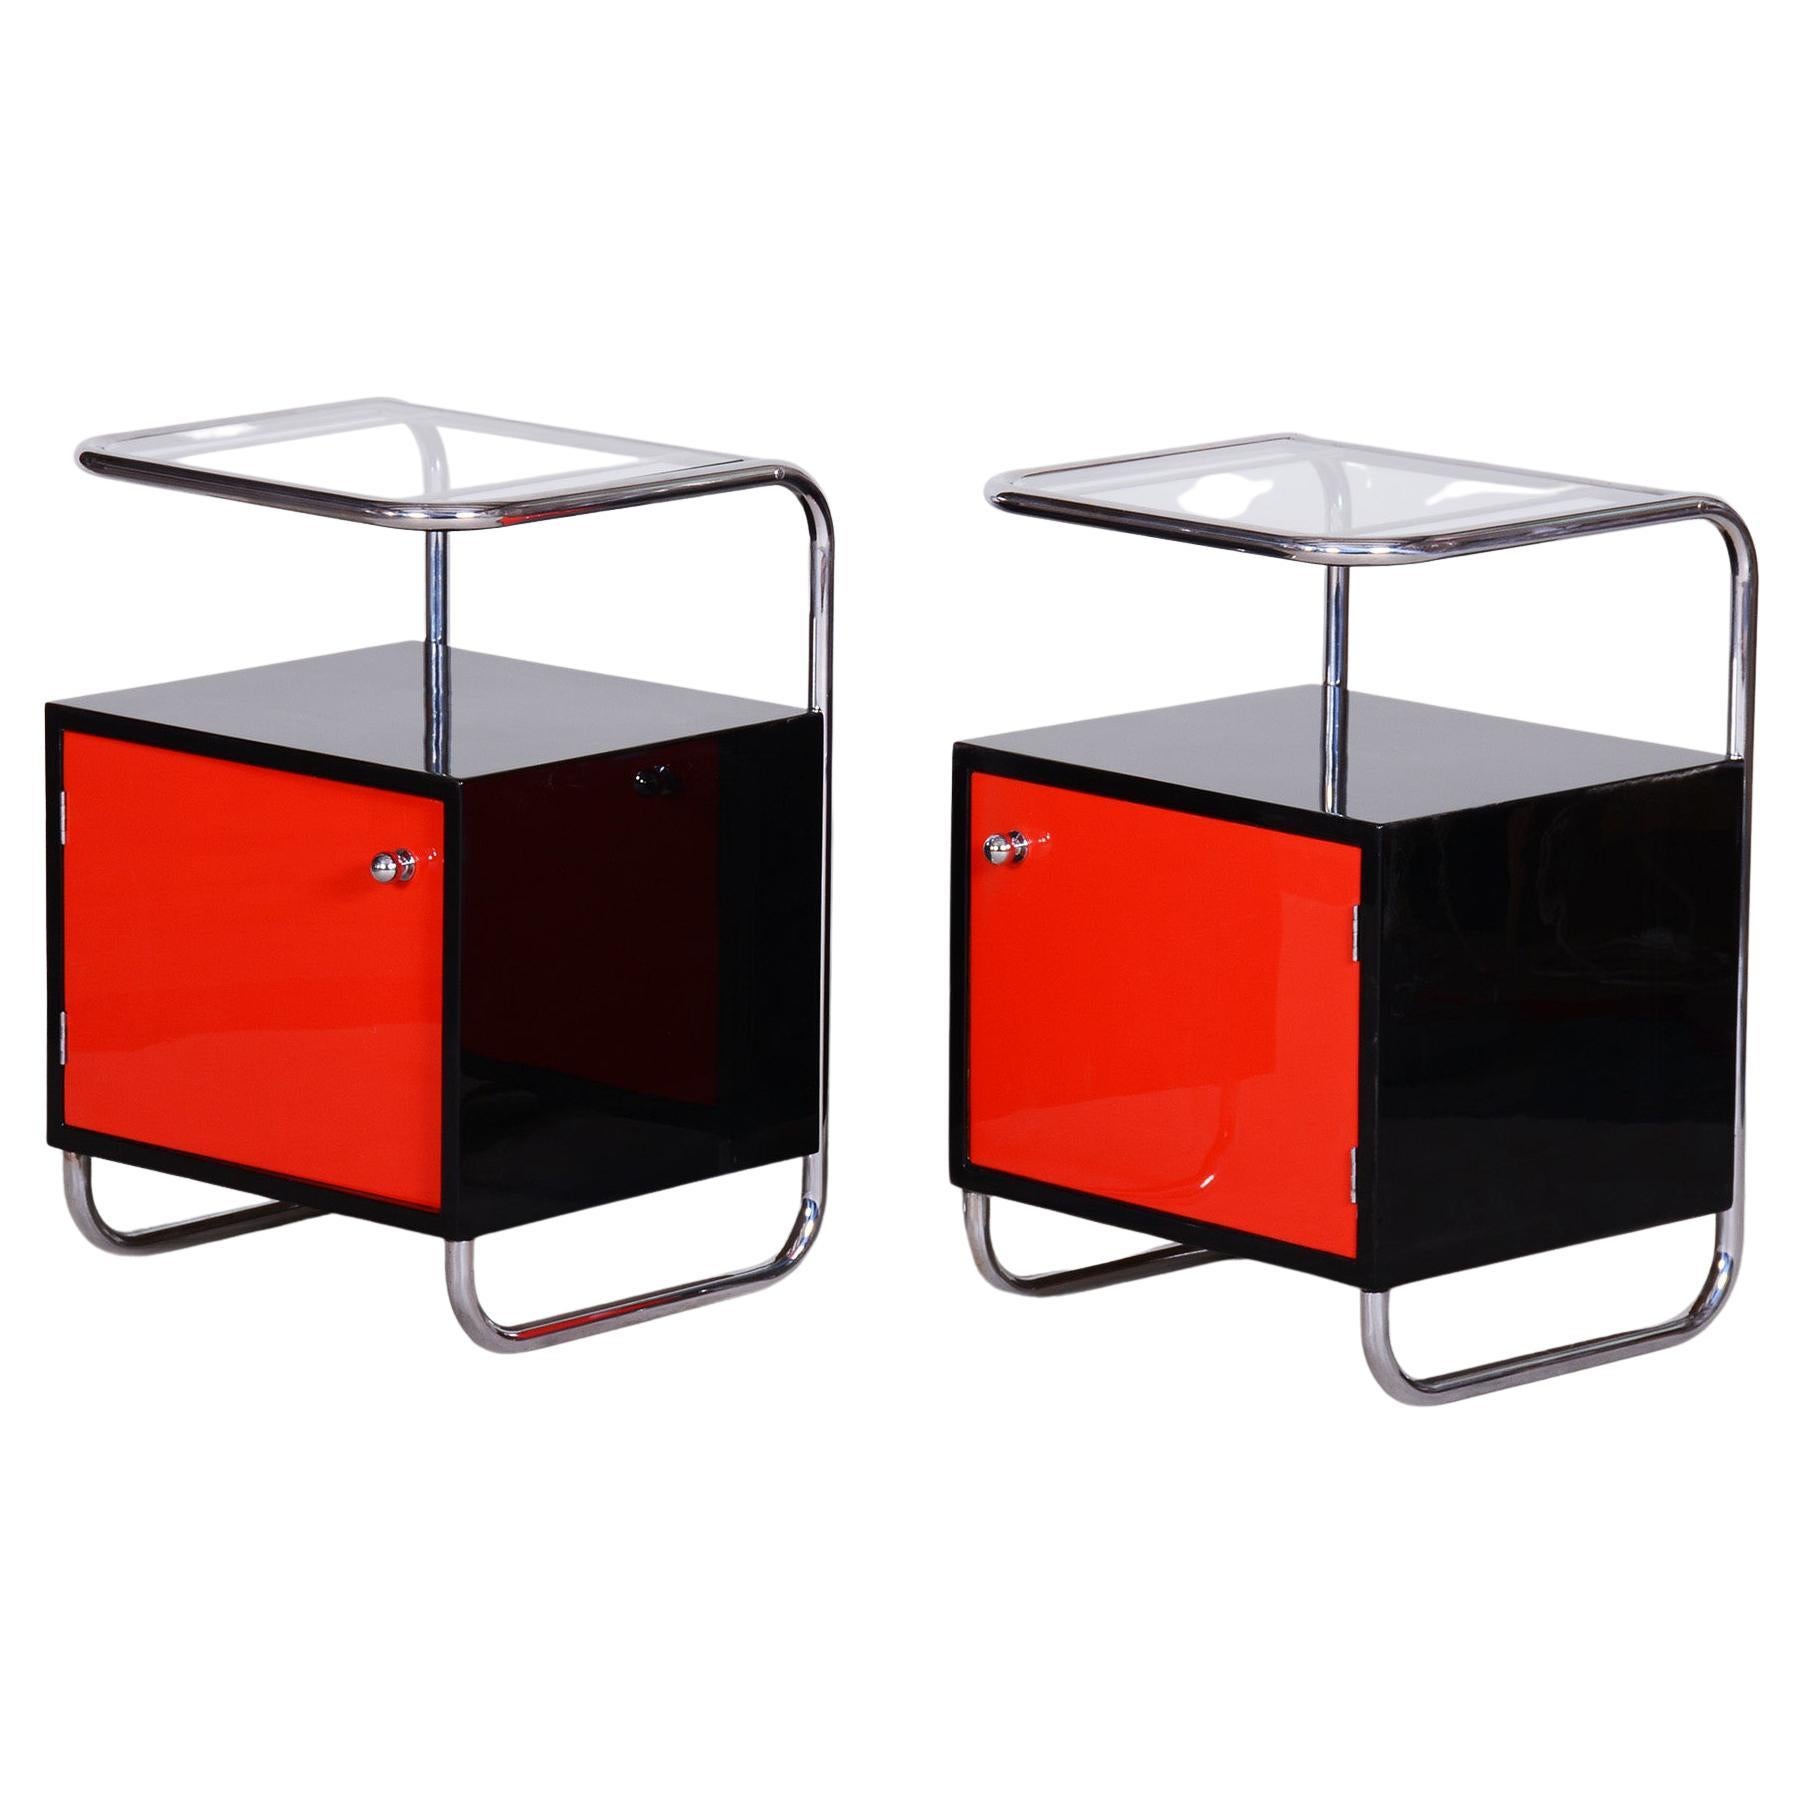 Black and Red Vichr a Spol Bedside Tables, 1930s Czechia For Sale